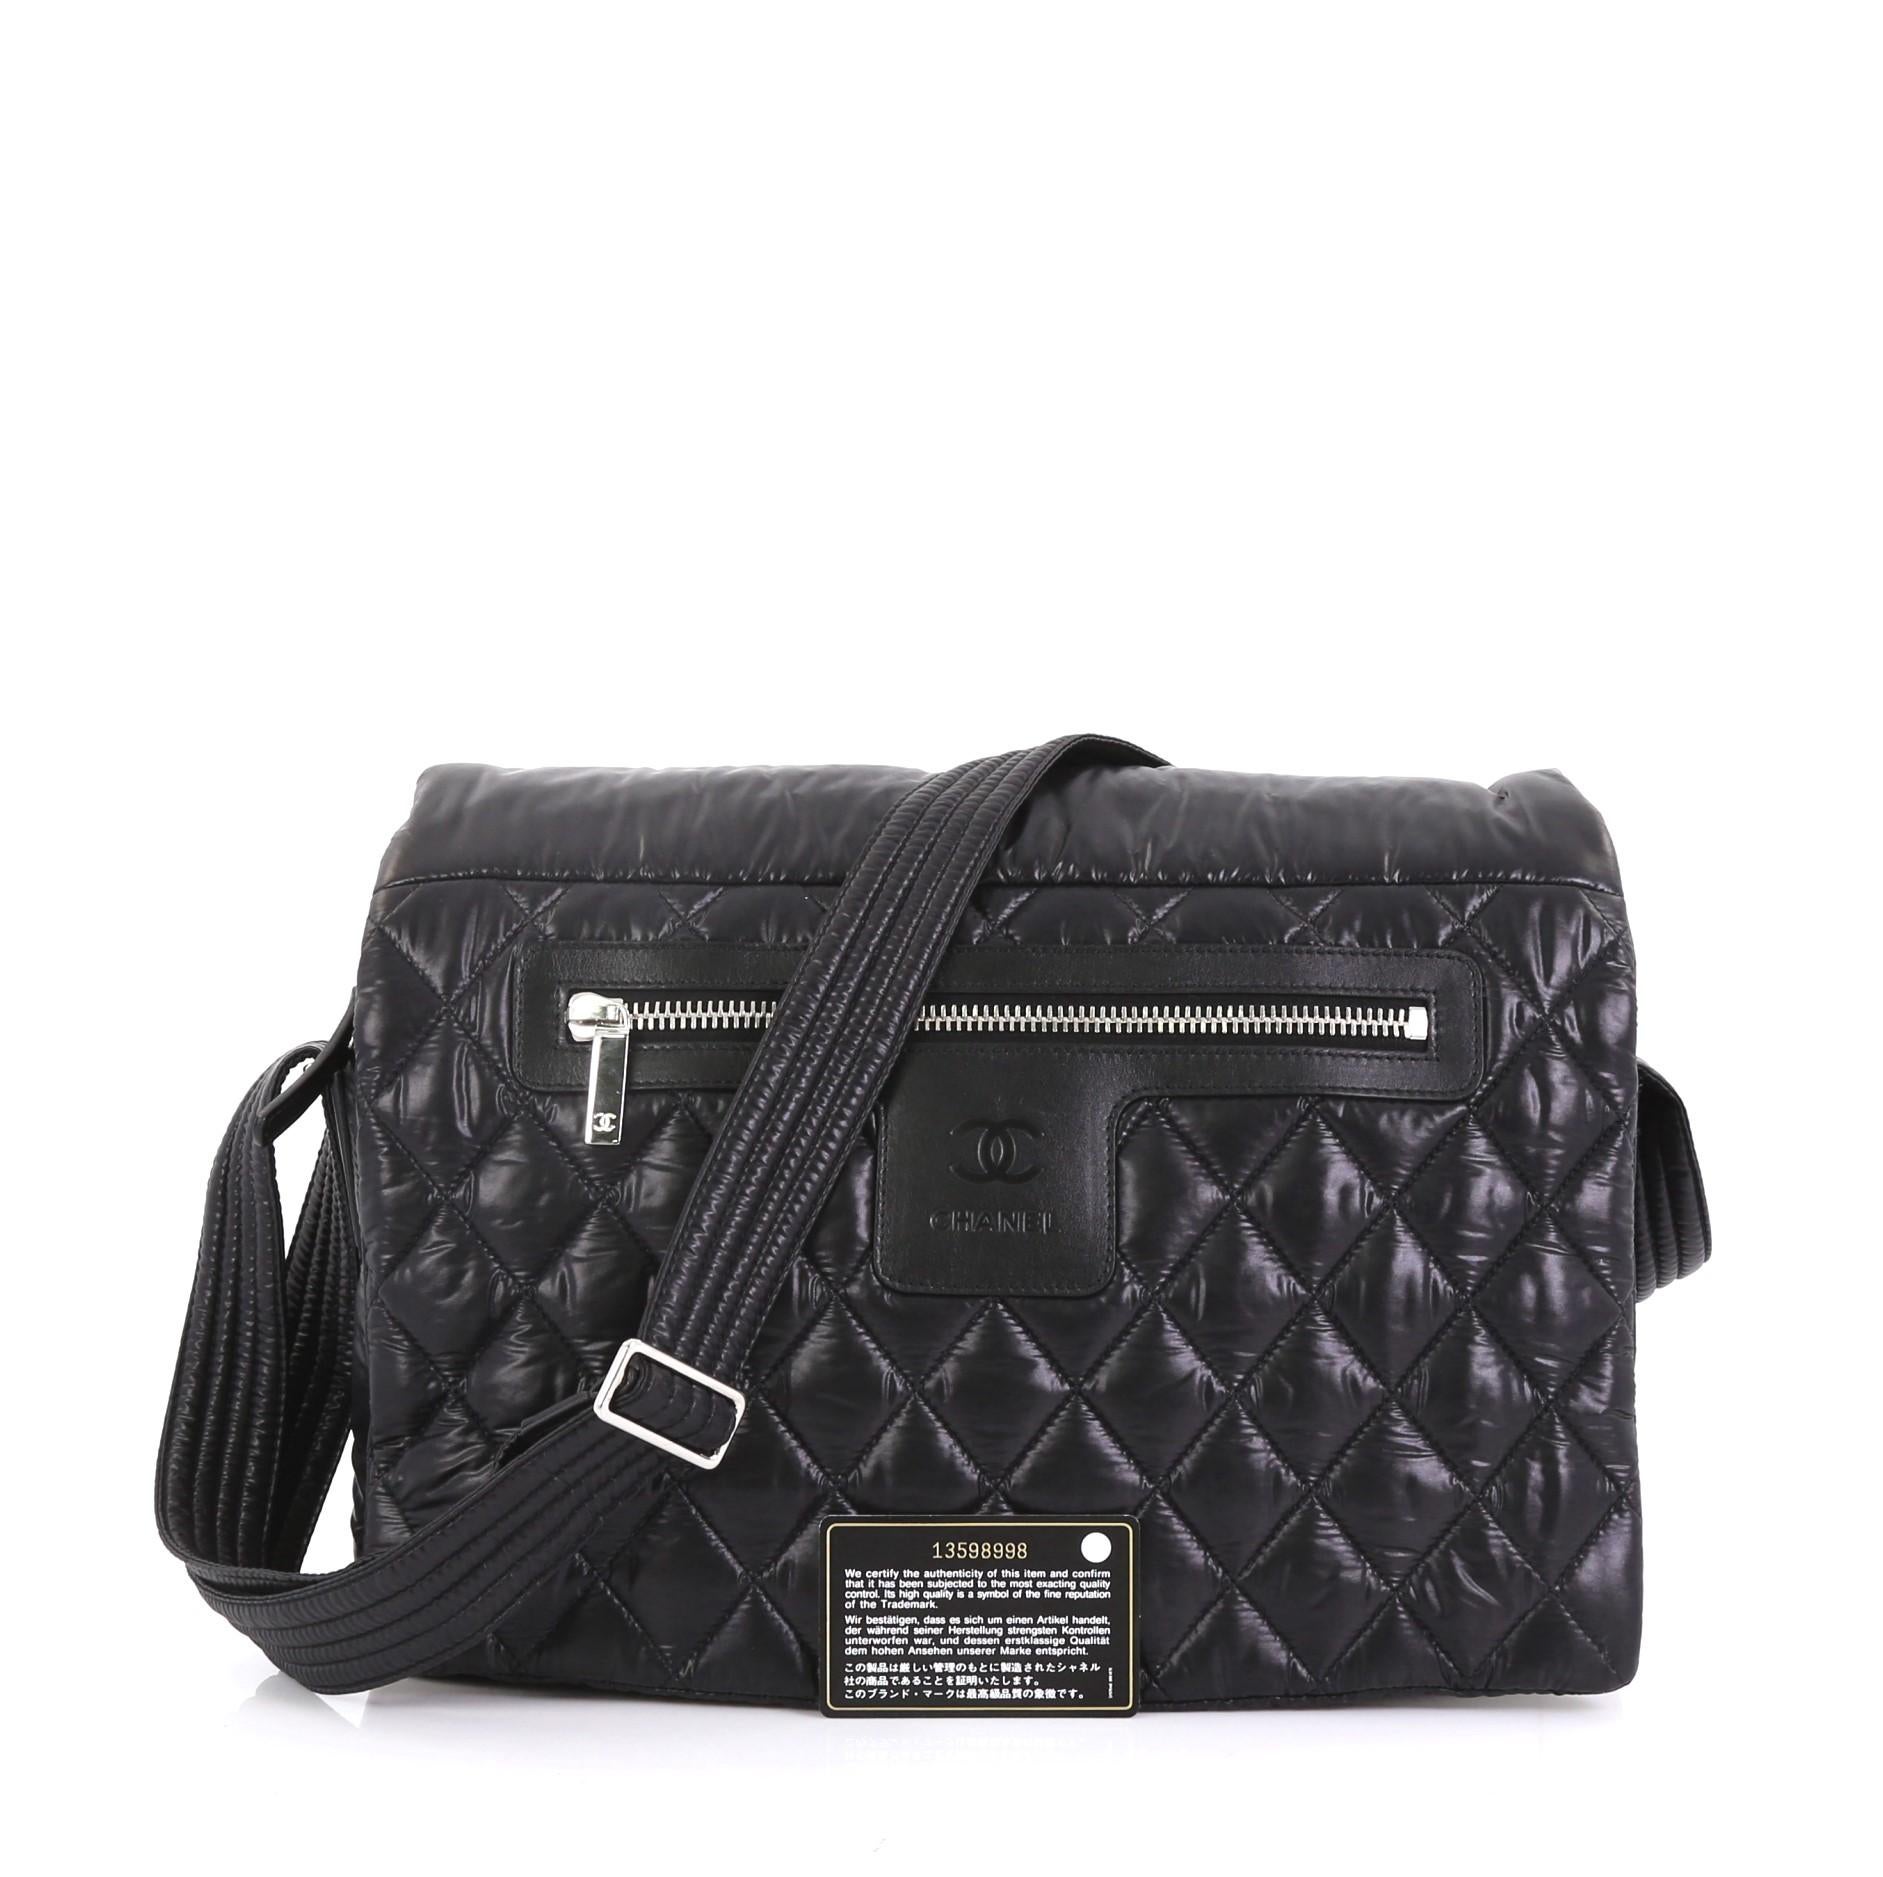 This Chanel Coco Cocoon Messenger Bag Quilted Nylon Large, crafted in black quilted nylon, features a nylon quilted strap, exterior front zip pocket, and silver-tone hardware. Its flap and zip closure opens to a burgundy nylon interior with zip